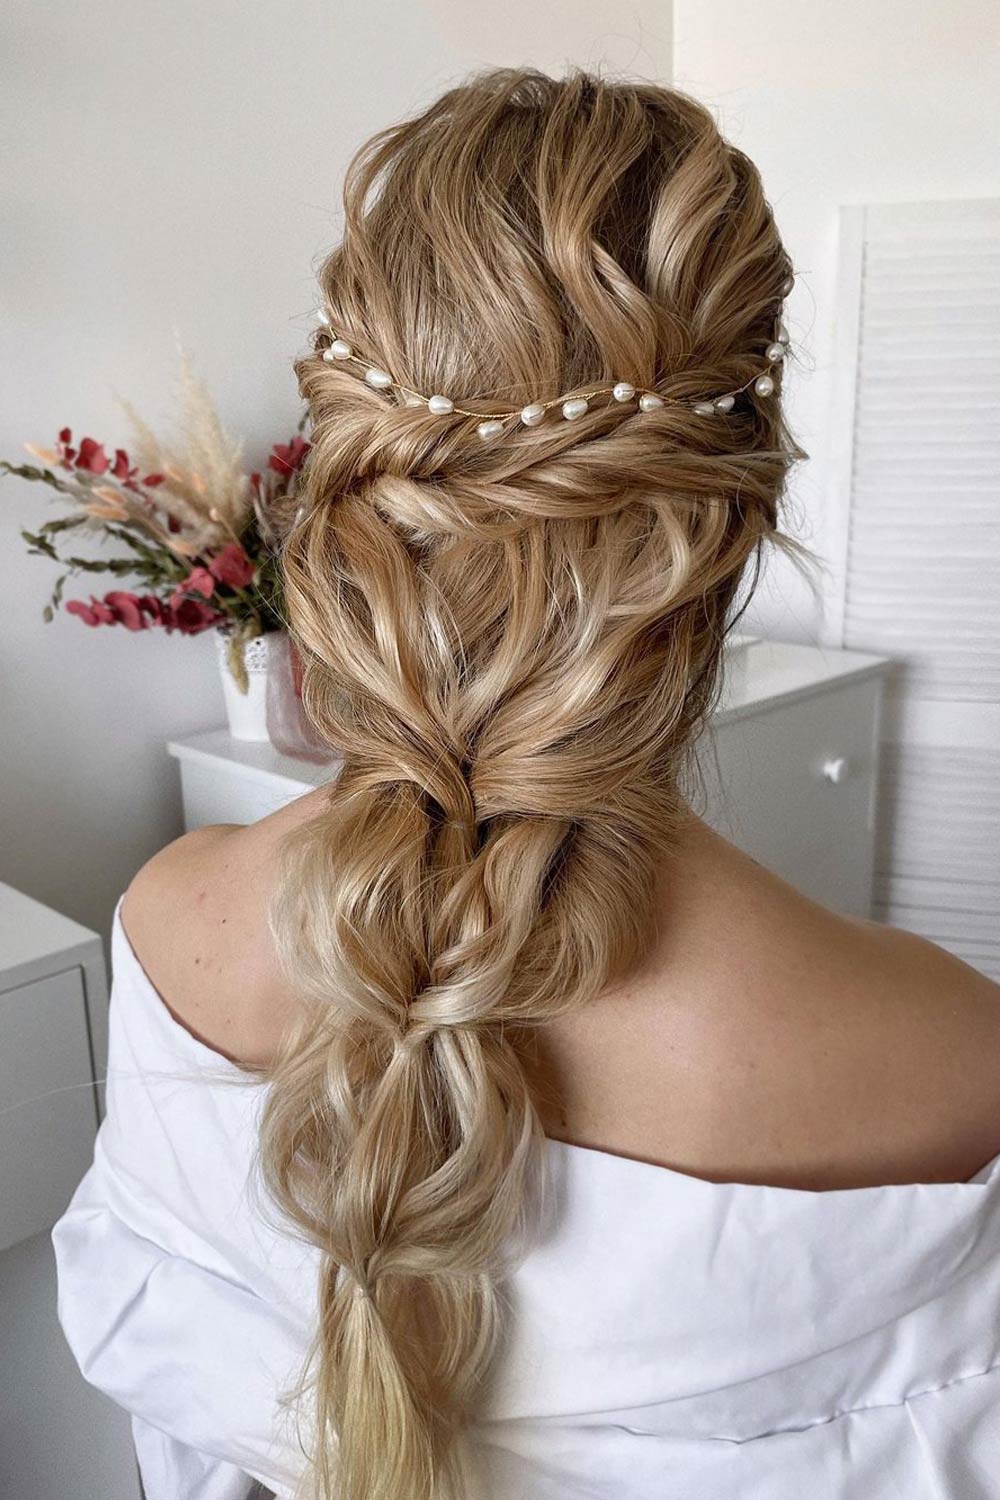 Unbraided Wedding Hairstyle With Hair Accessories